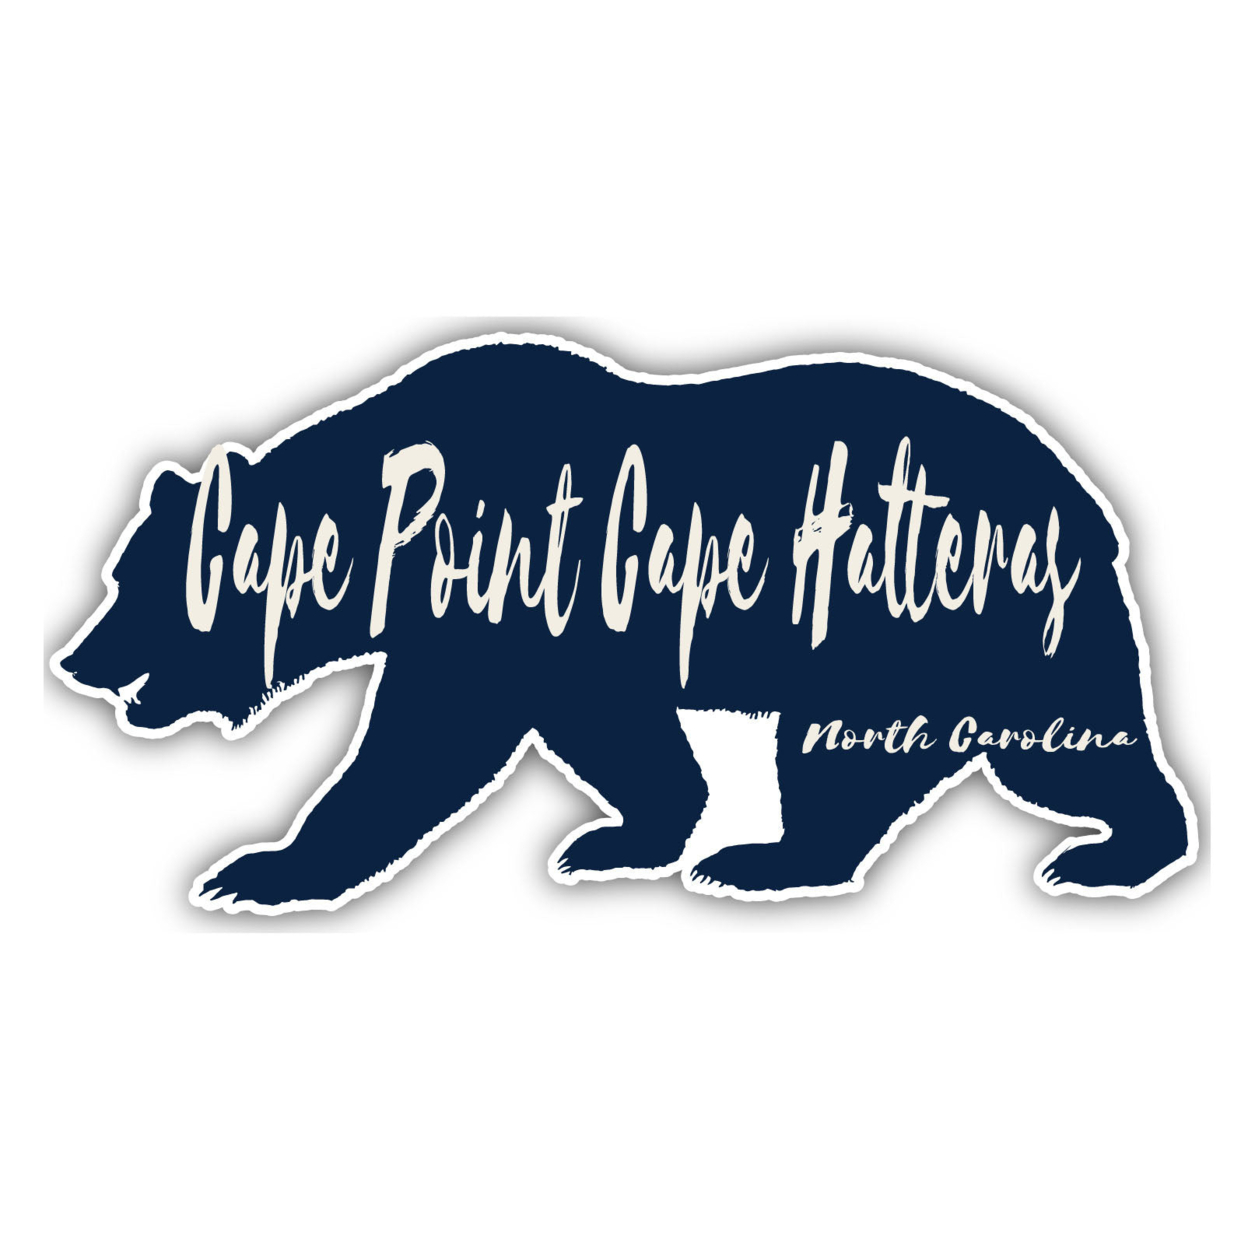 Cape Point Cape Hatteras North Carolina Souvenir Decorative Stickers (Choose Theme And Size) - 4-Pack, 12-Inch, Bear